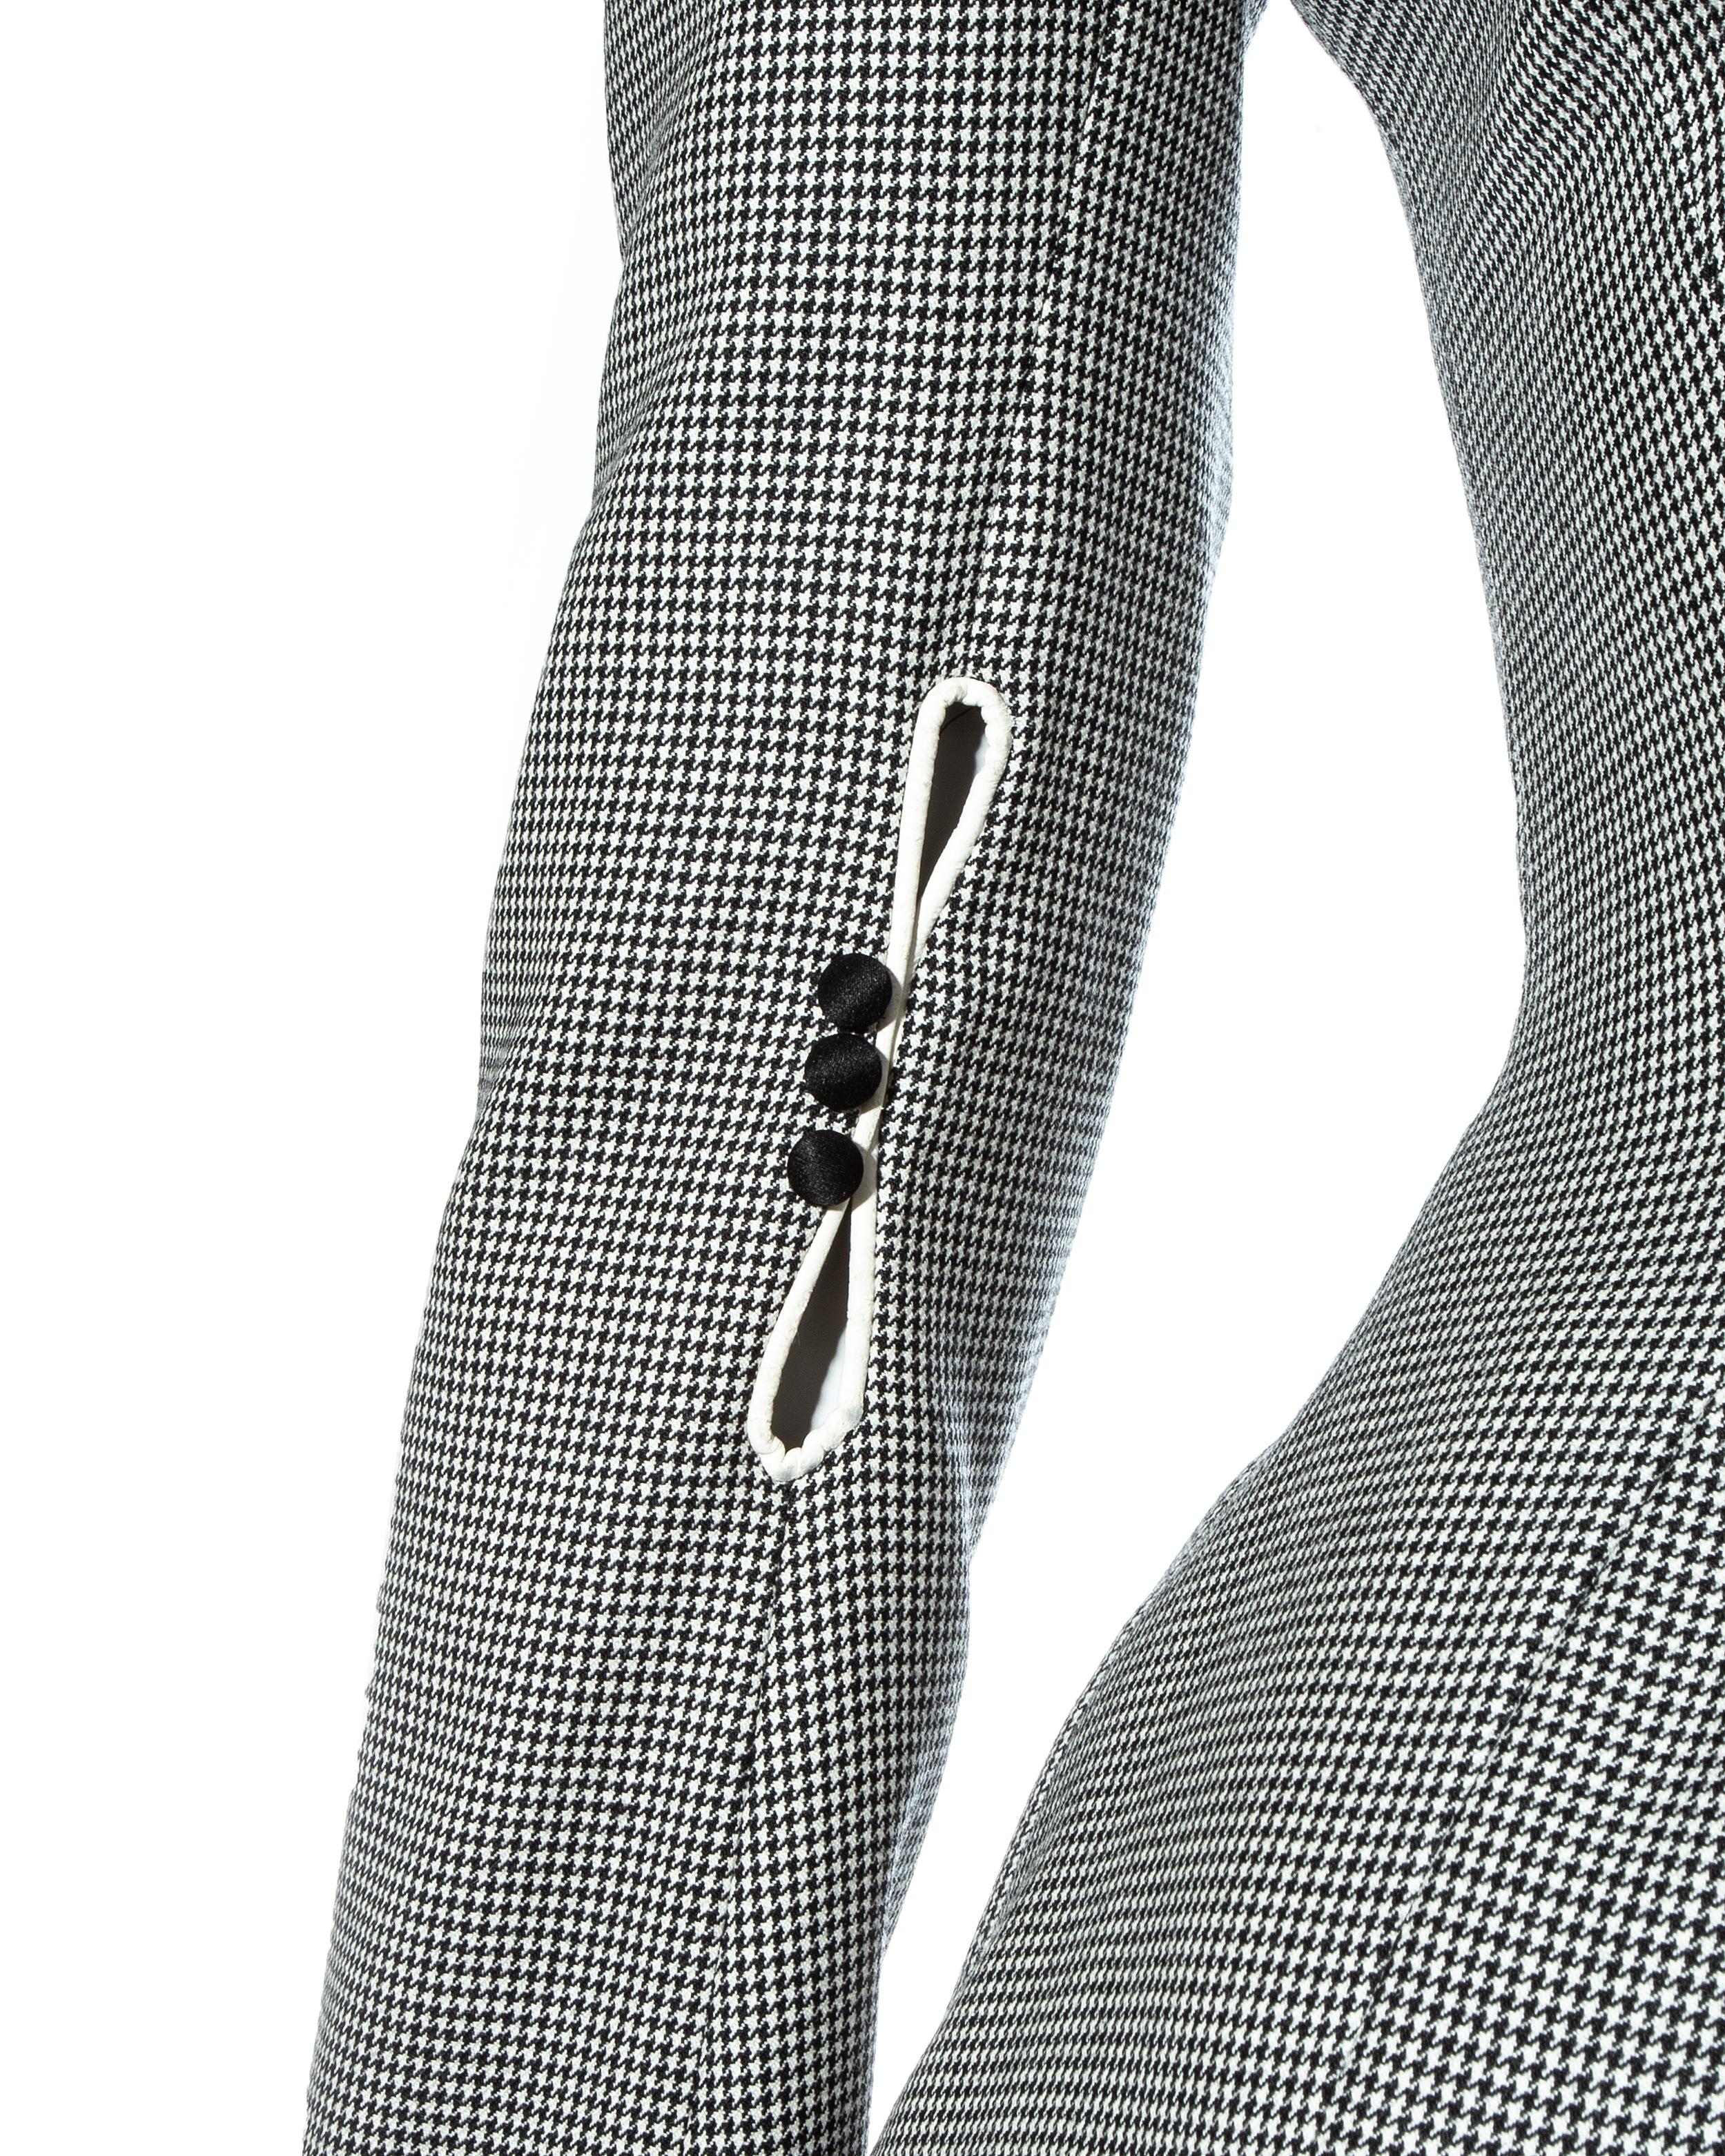 John Galliano hounds tooth check wool skirt suit, ss 1995 1